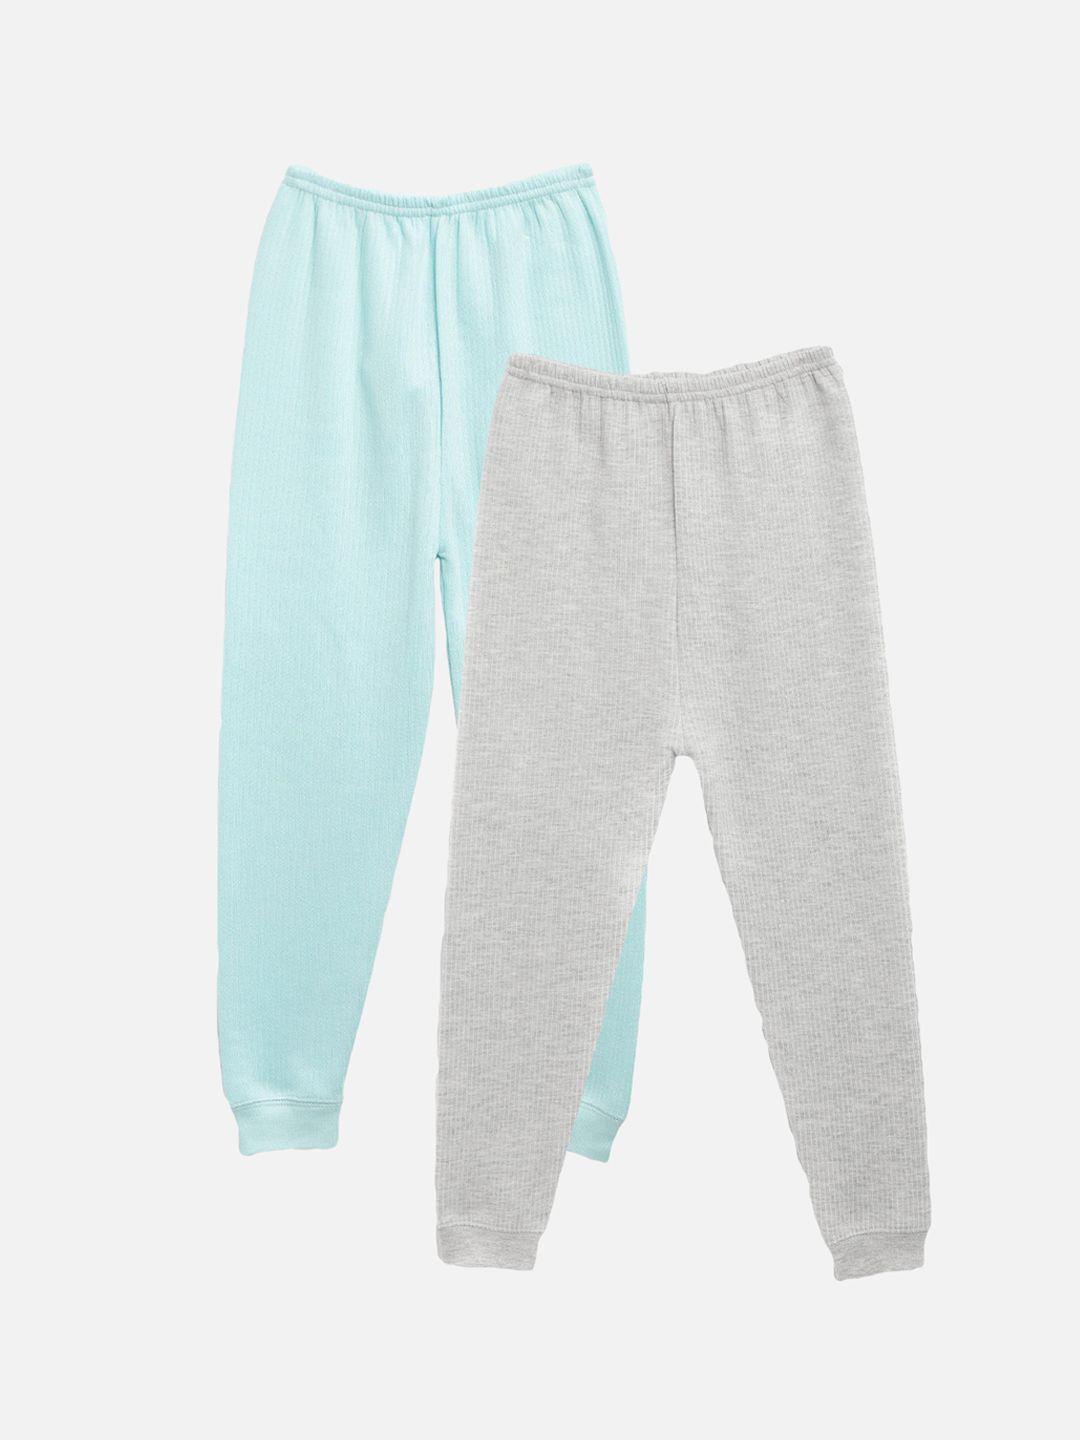 kanvin boys pack of 2 grey and turquoise blue thermal bottoms